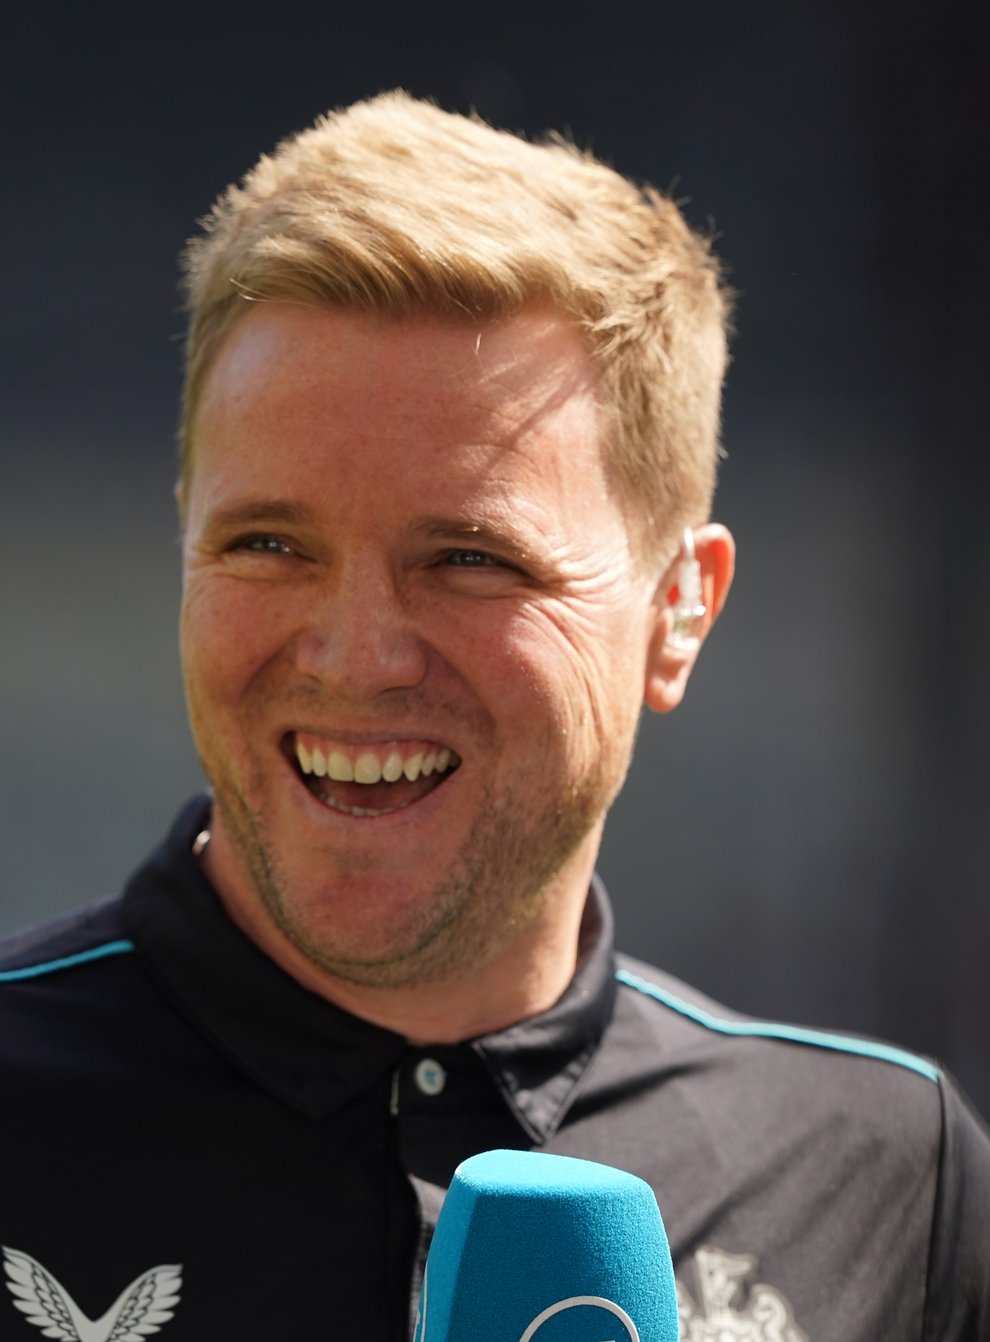 Newcastle head coach Eddie Howe was linked with the Arsenal job earlier in his career (Owen Humphreys/PA)